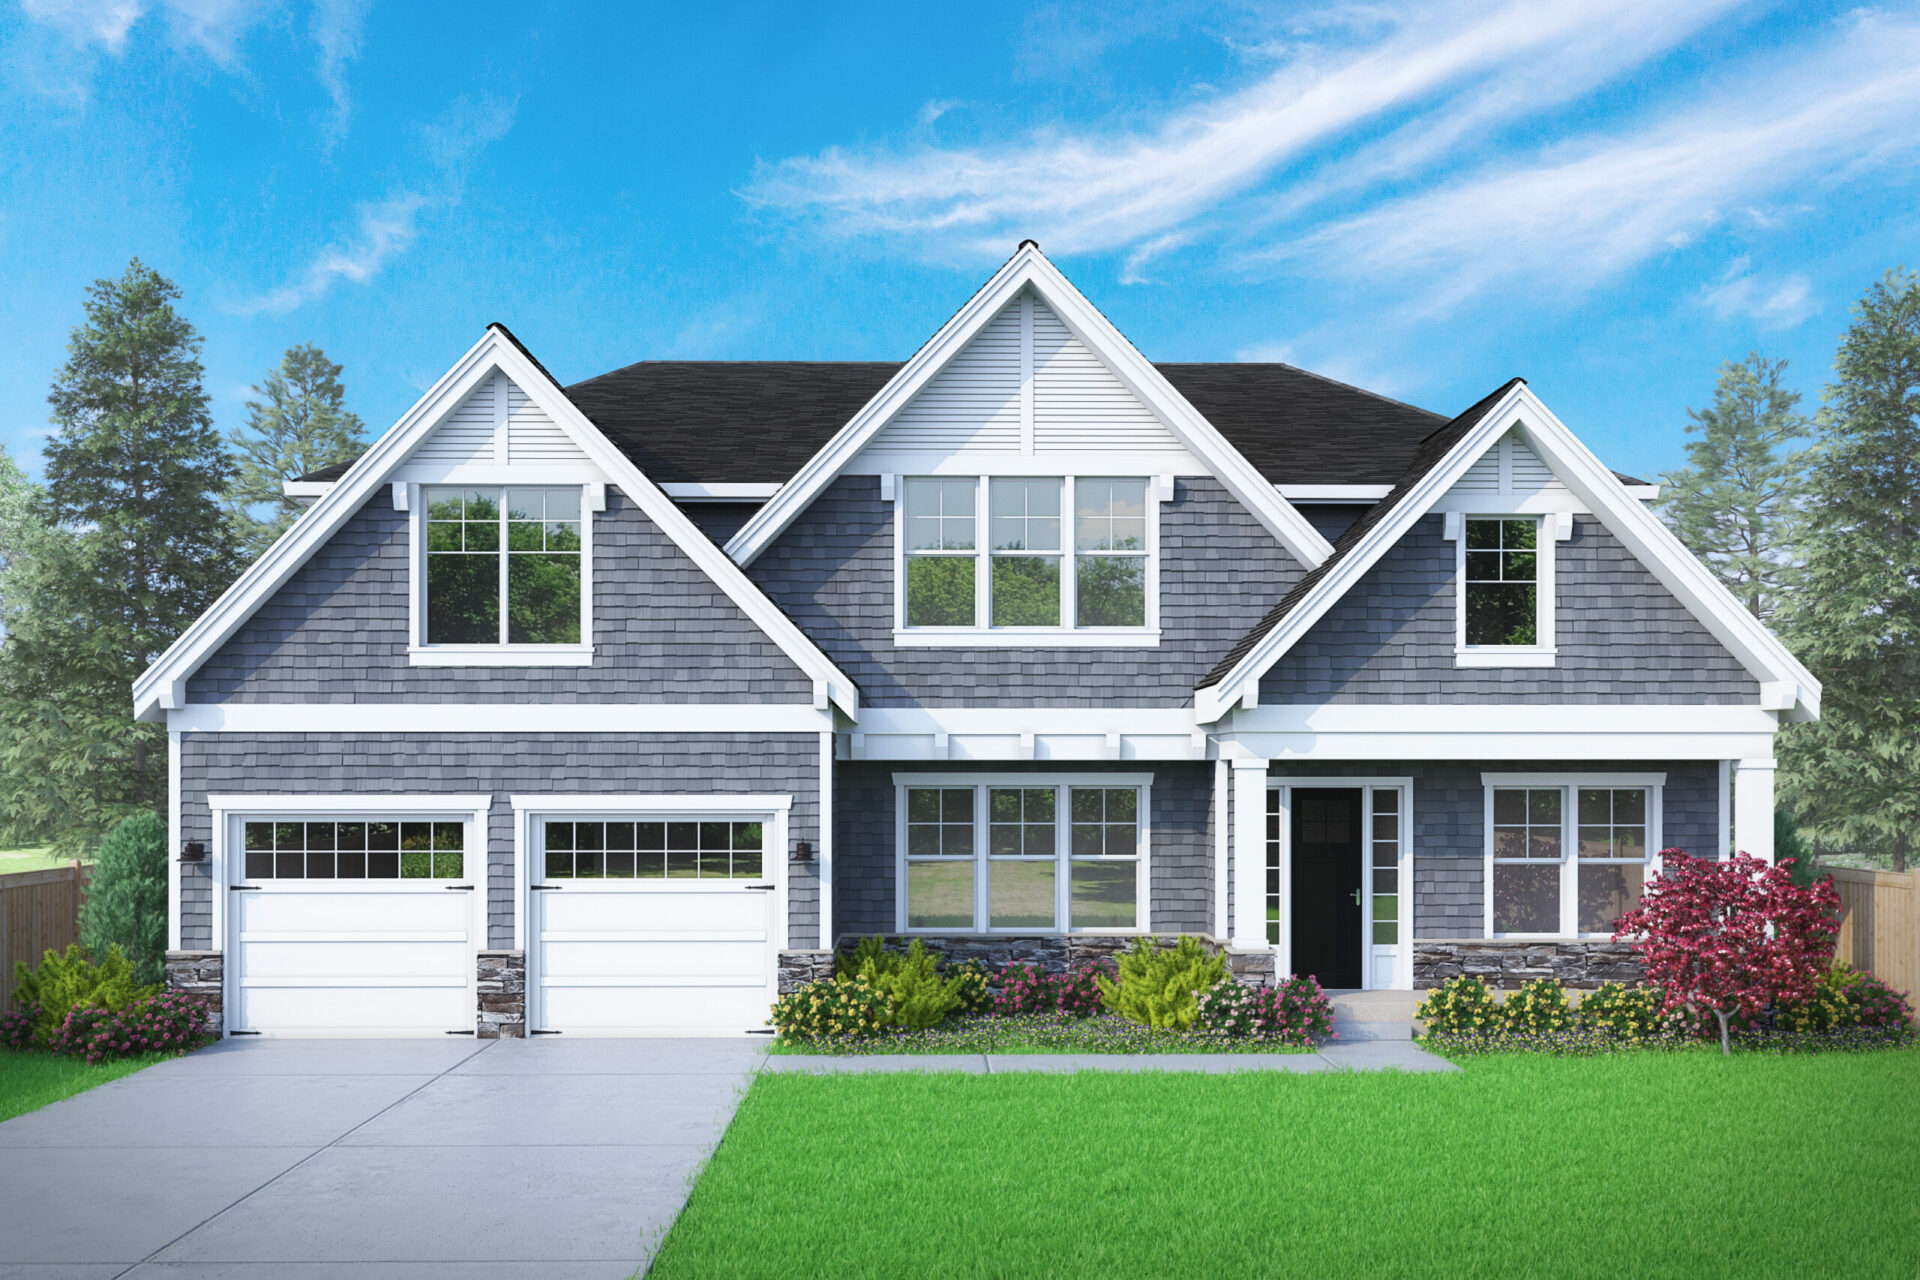 View our new luxury home construction on 16215 NE 3rd St, in Bellevue, WA from MN Custom Homes